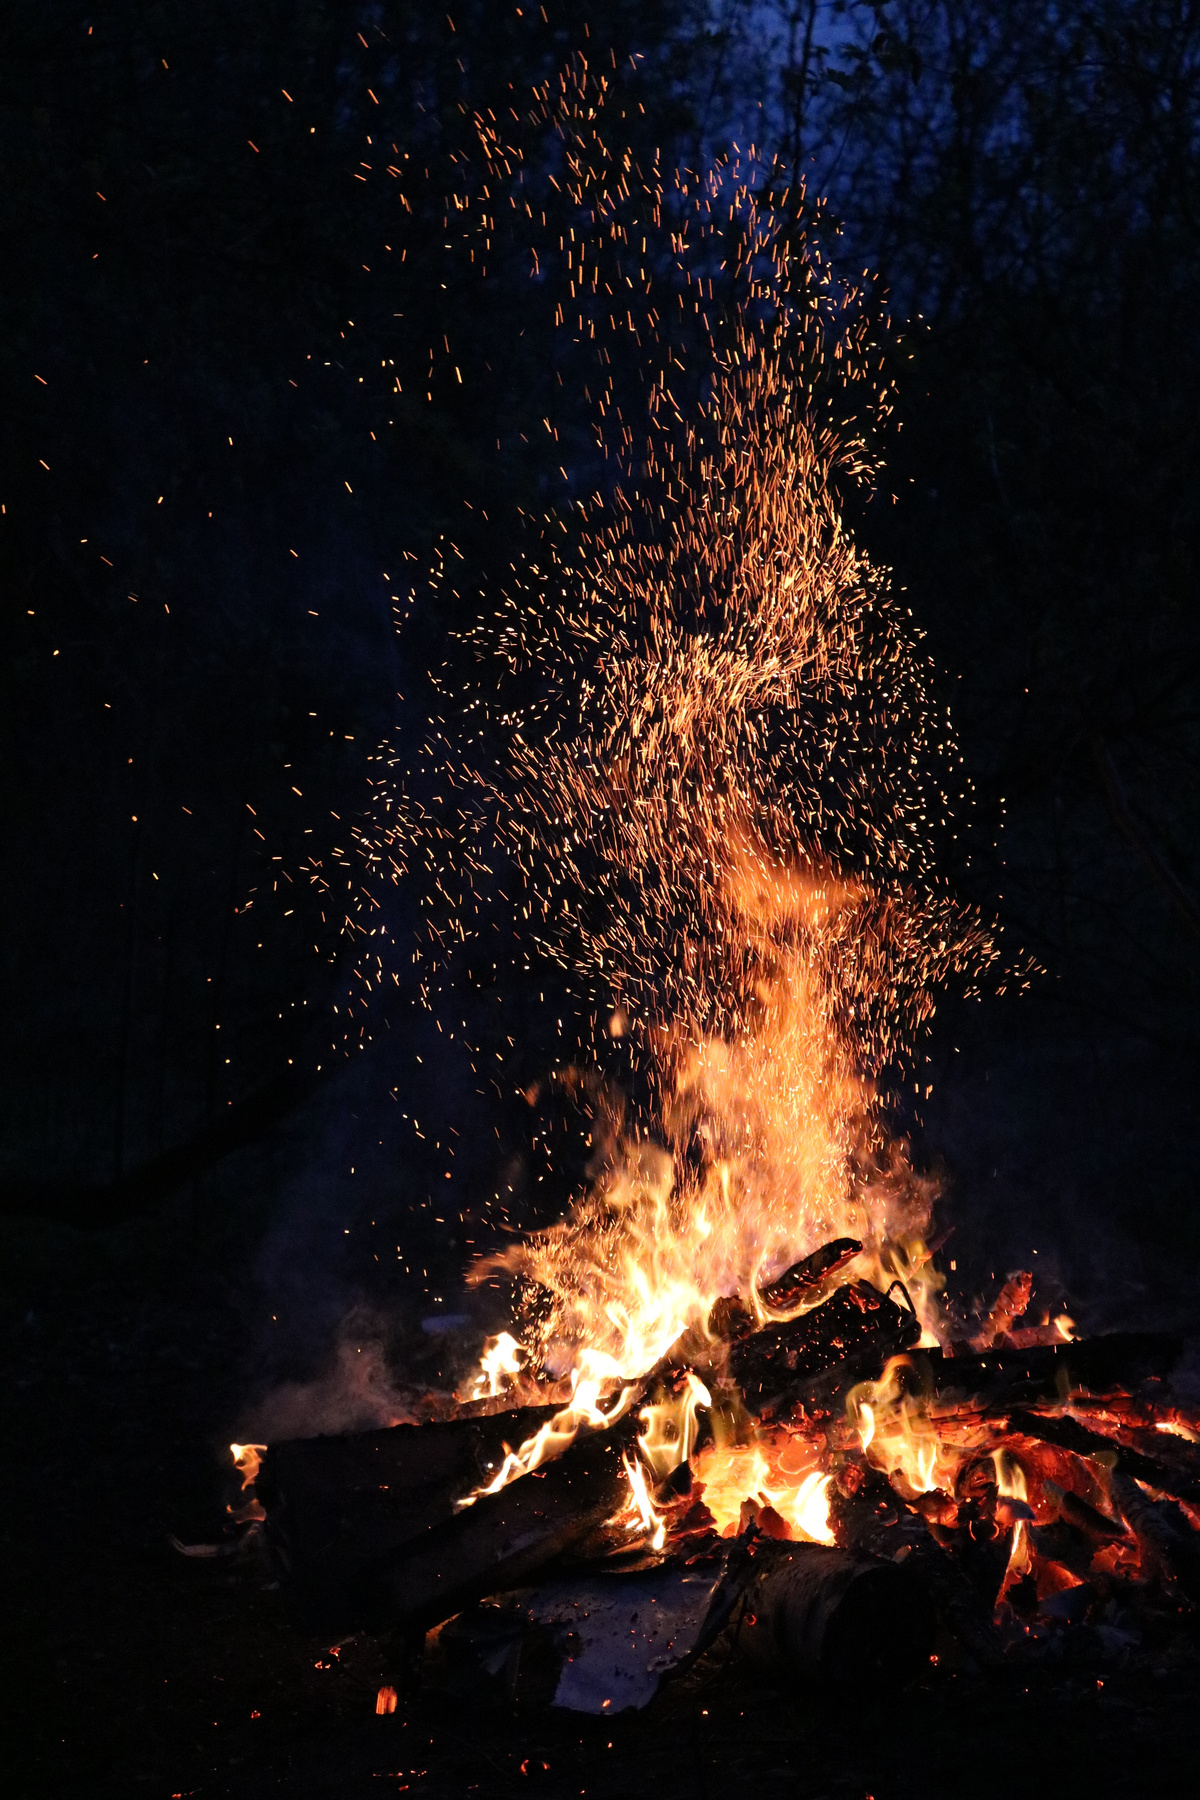 Bonfire in a Forest